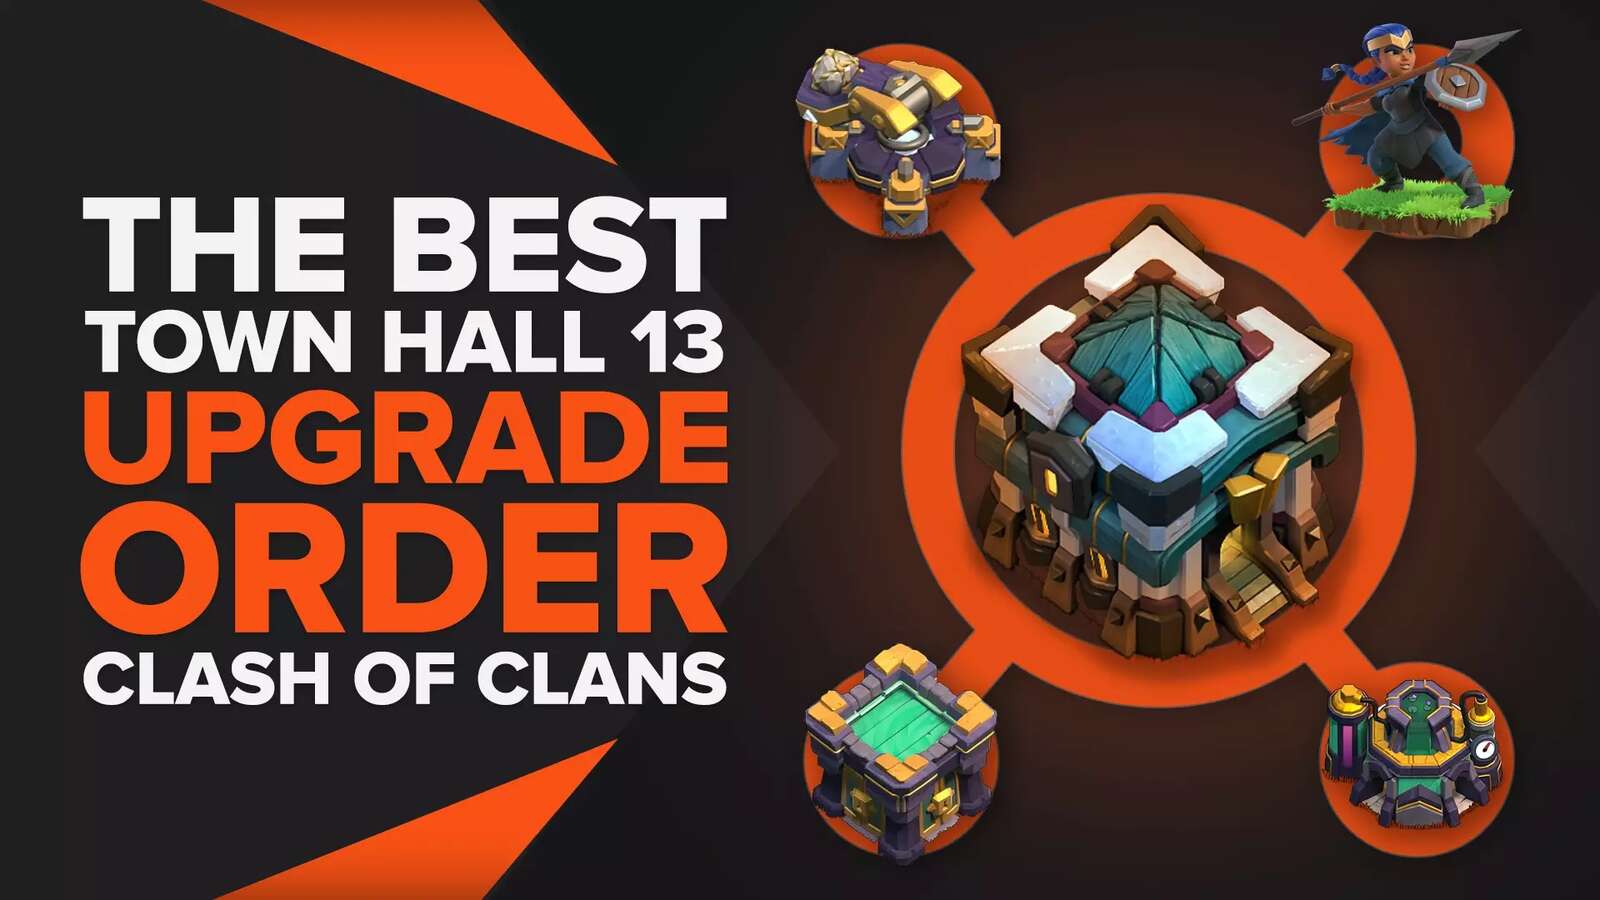 See The Best Town Hall 13 Upgrade Order In Clash Of Clans!